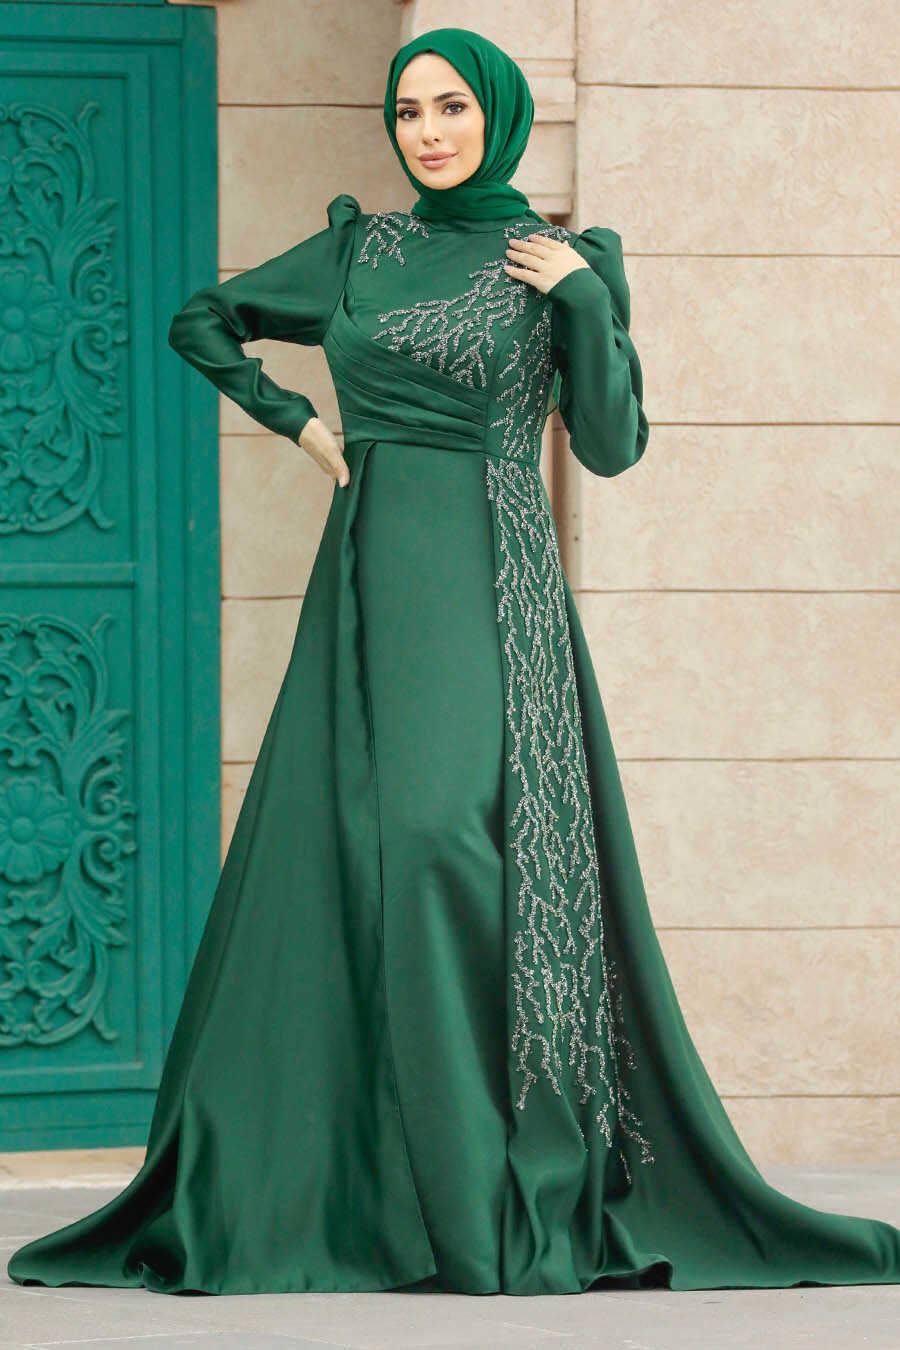 Neva Style - Luxorious Emerald Green Modest Evening Gown 2295ZY